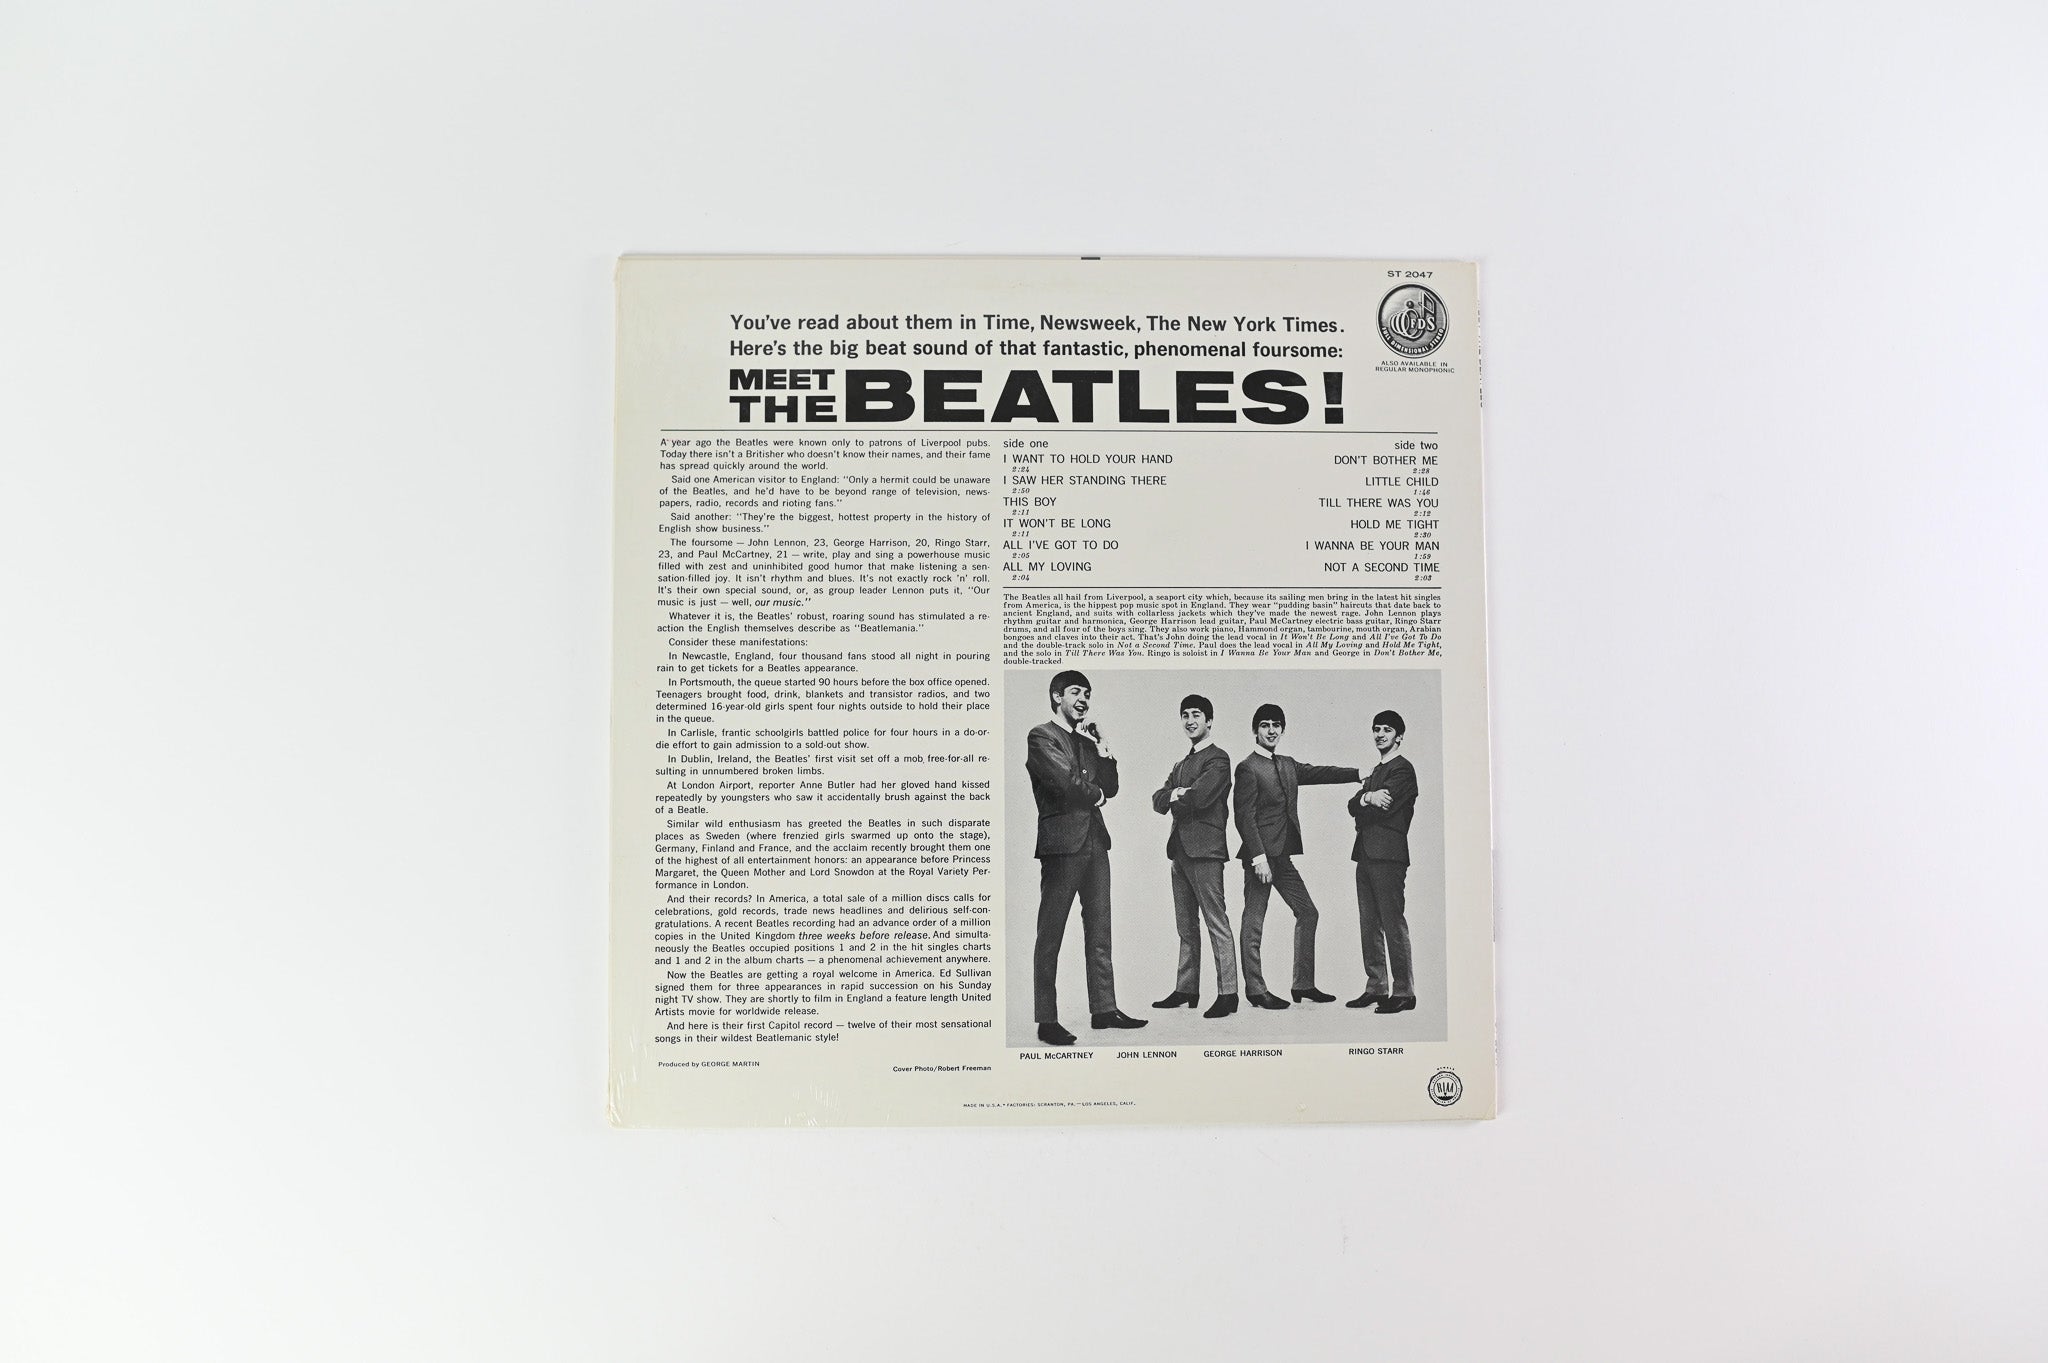 The Beatles - Meet The Beatles! on Capitol - Sealed